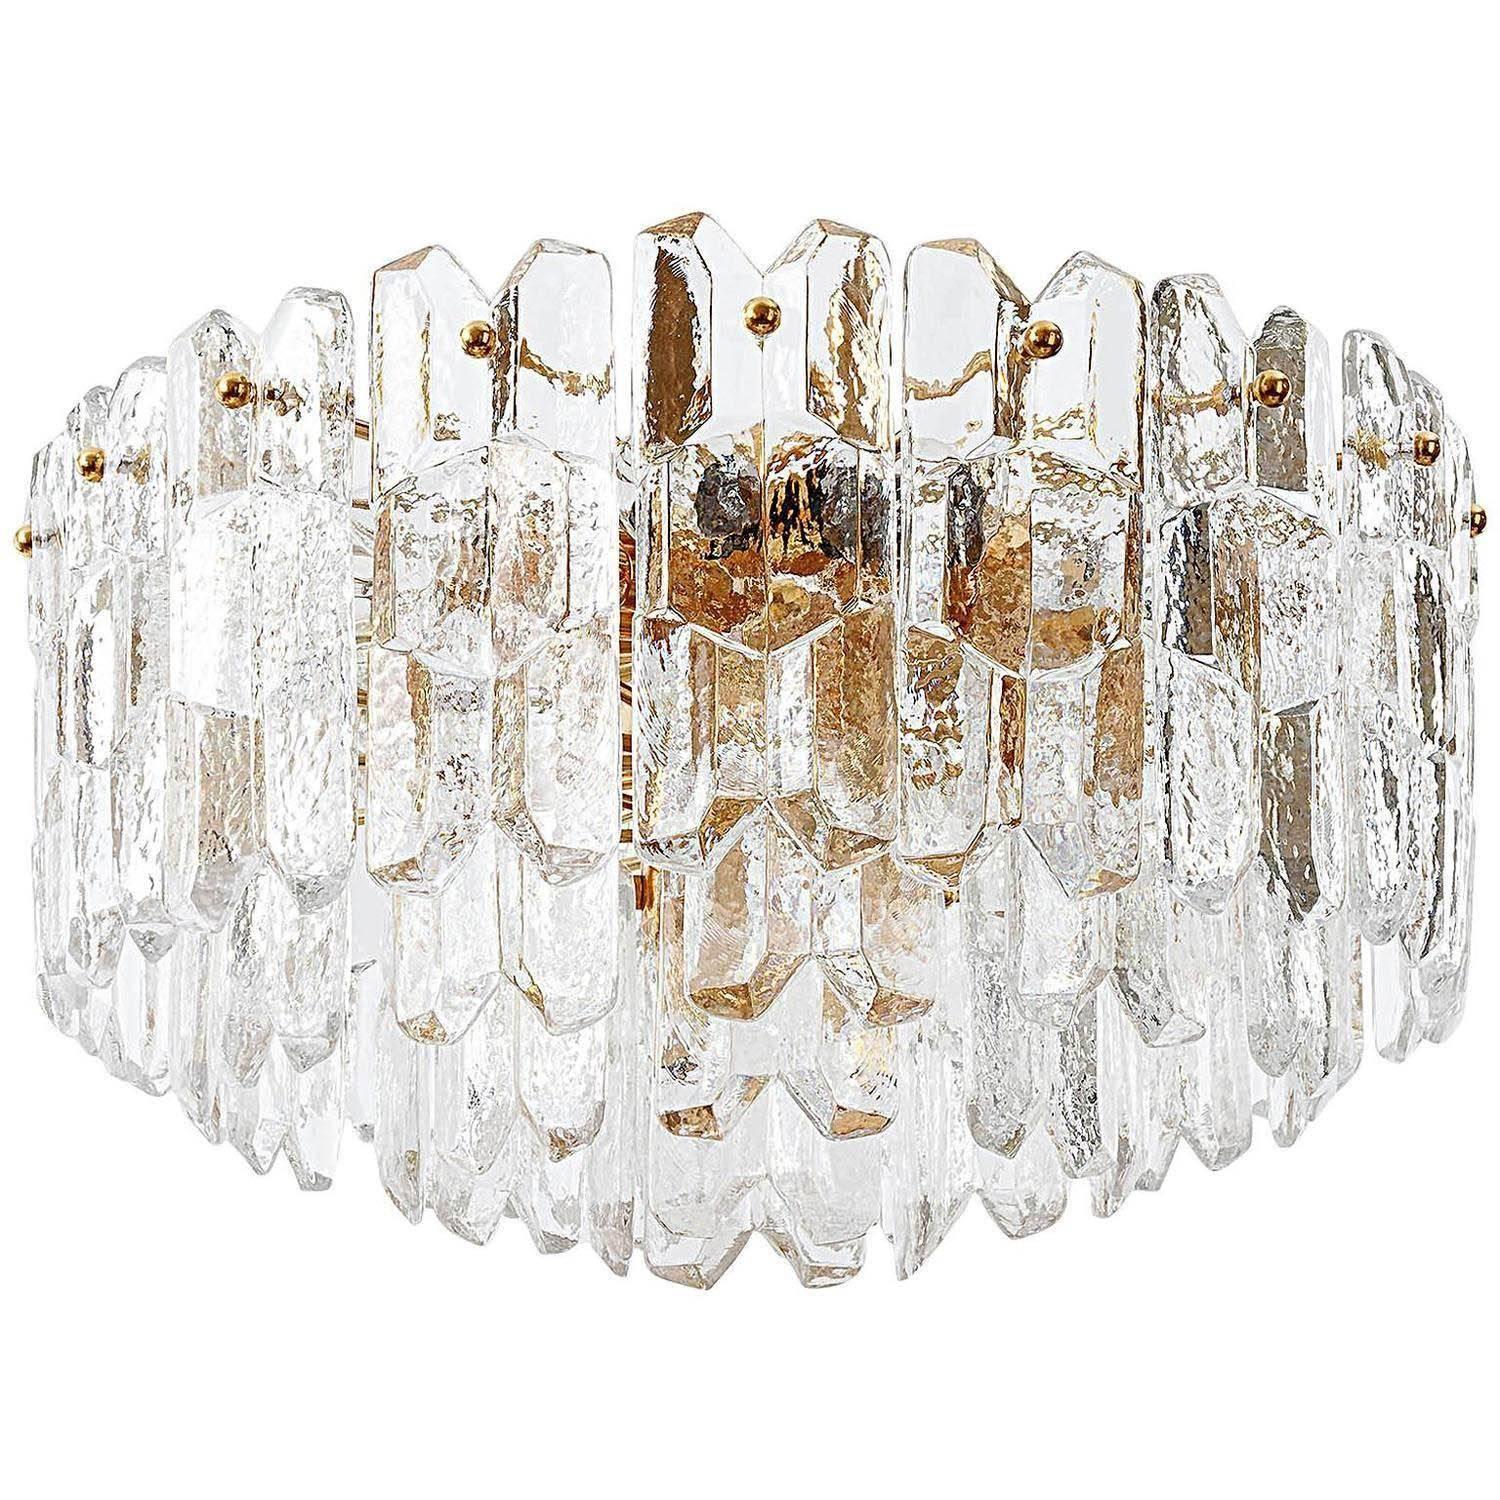 A very exquisite 24-carat gold-plated brass and clear brilliant glass flush mount lights by J.T. Kalmar, Vienna, Austria, manufactured in midcentury, circa 1970 (late 1960s and early 1970s).
The model name is 'Palazzo'. The light is marked with a